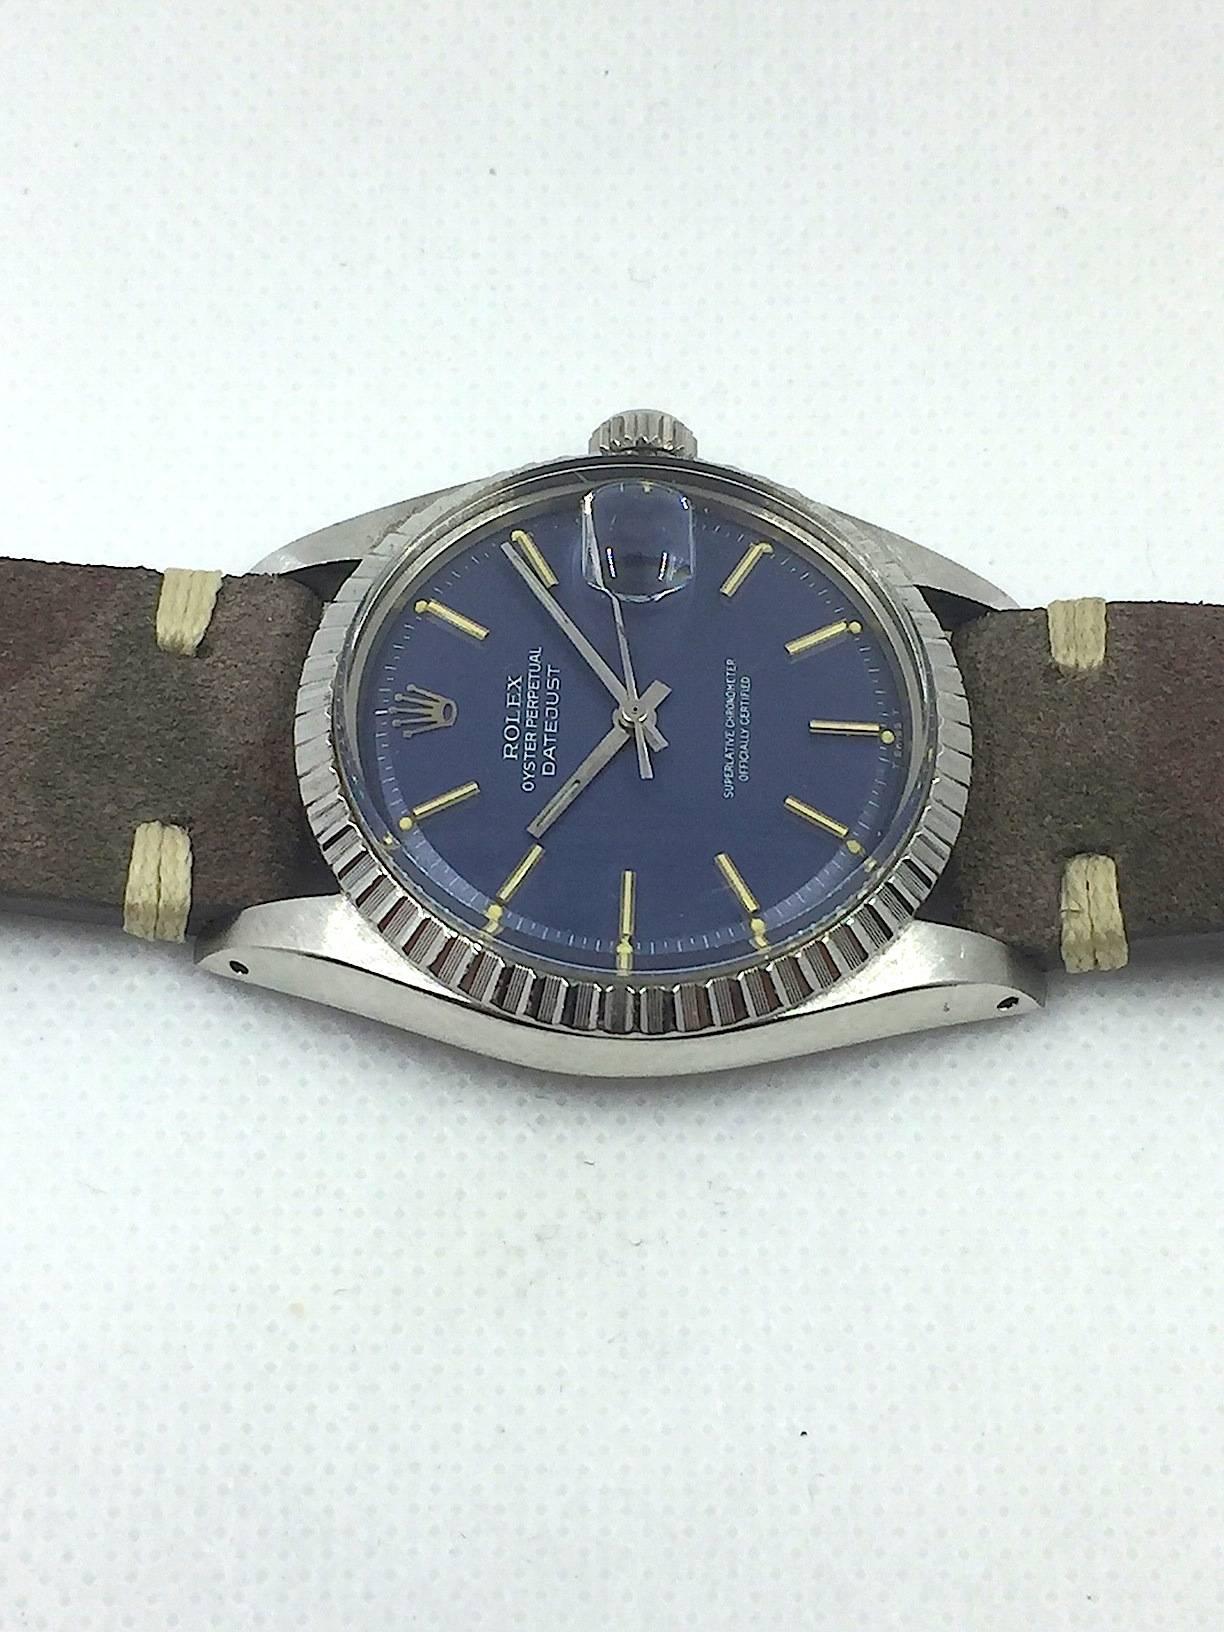 Women's or Men's Rolex Stainless Steel Oyster Perpetual Datejust Wristwatch, 1970s